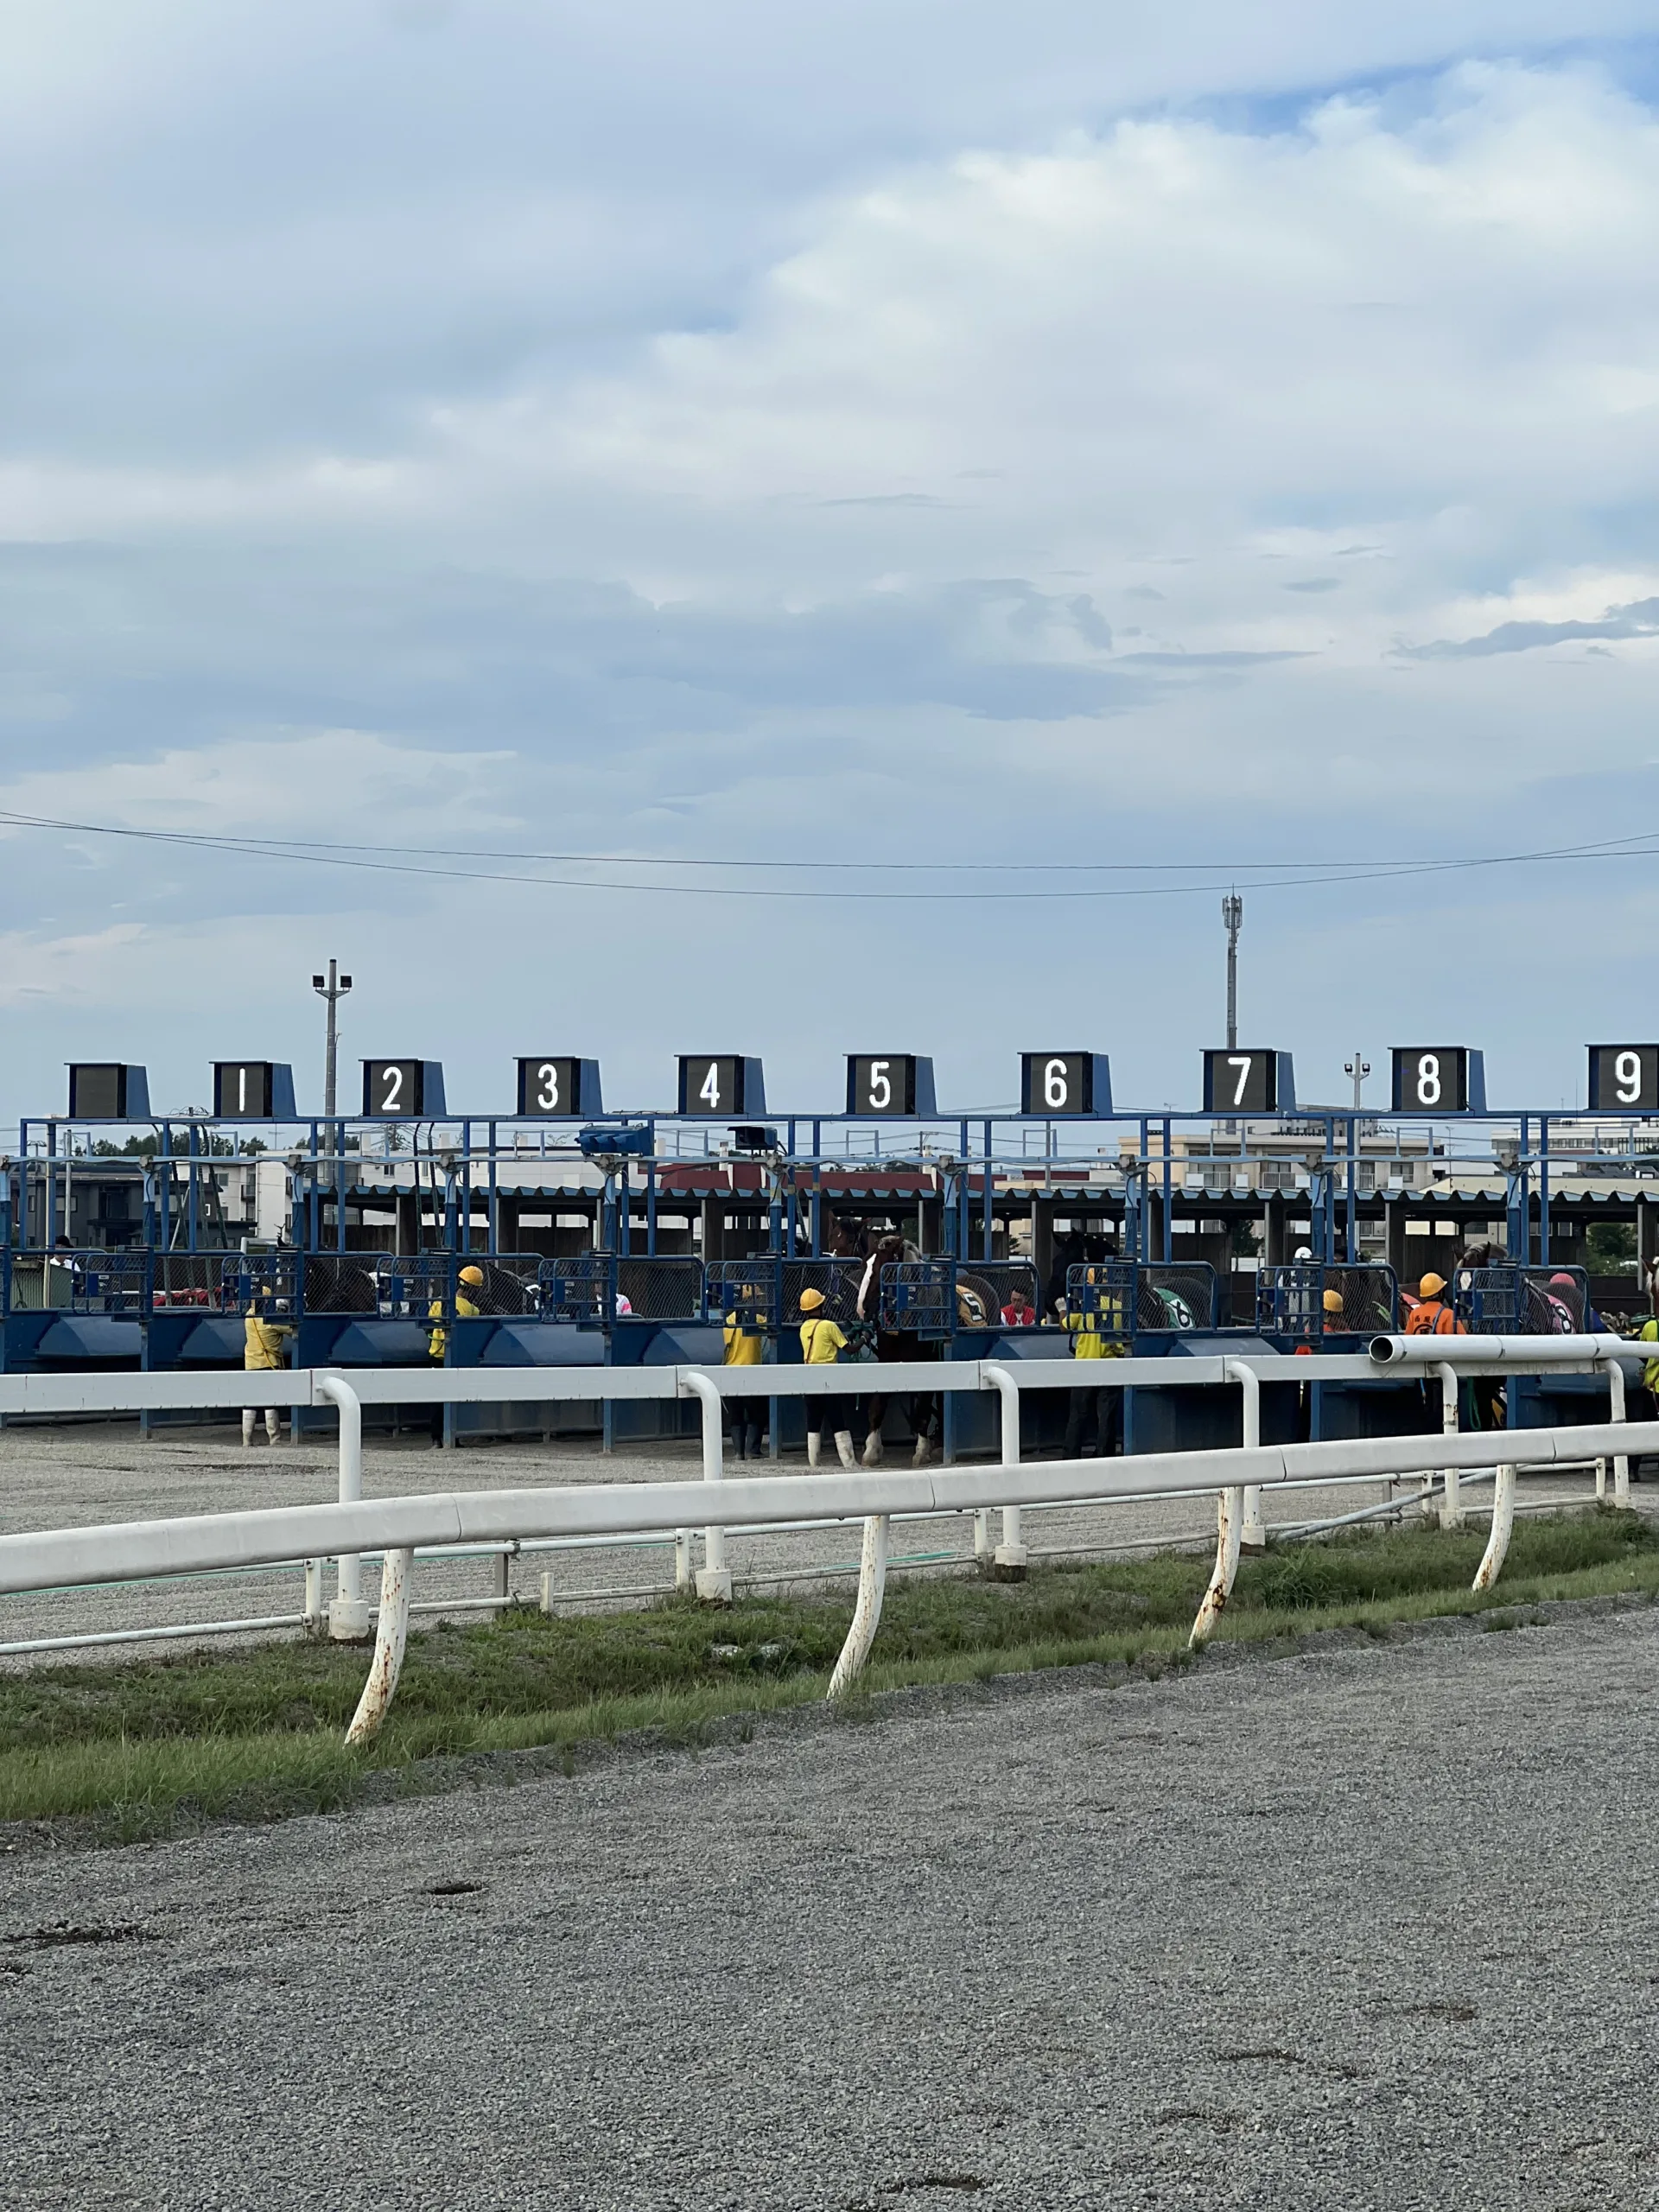 Banei Horse Racing: A Unique Cultural Spectacle in Hokkaido